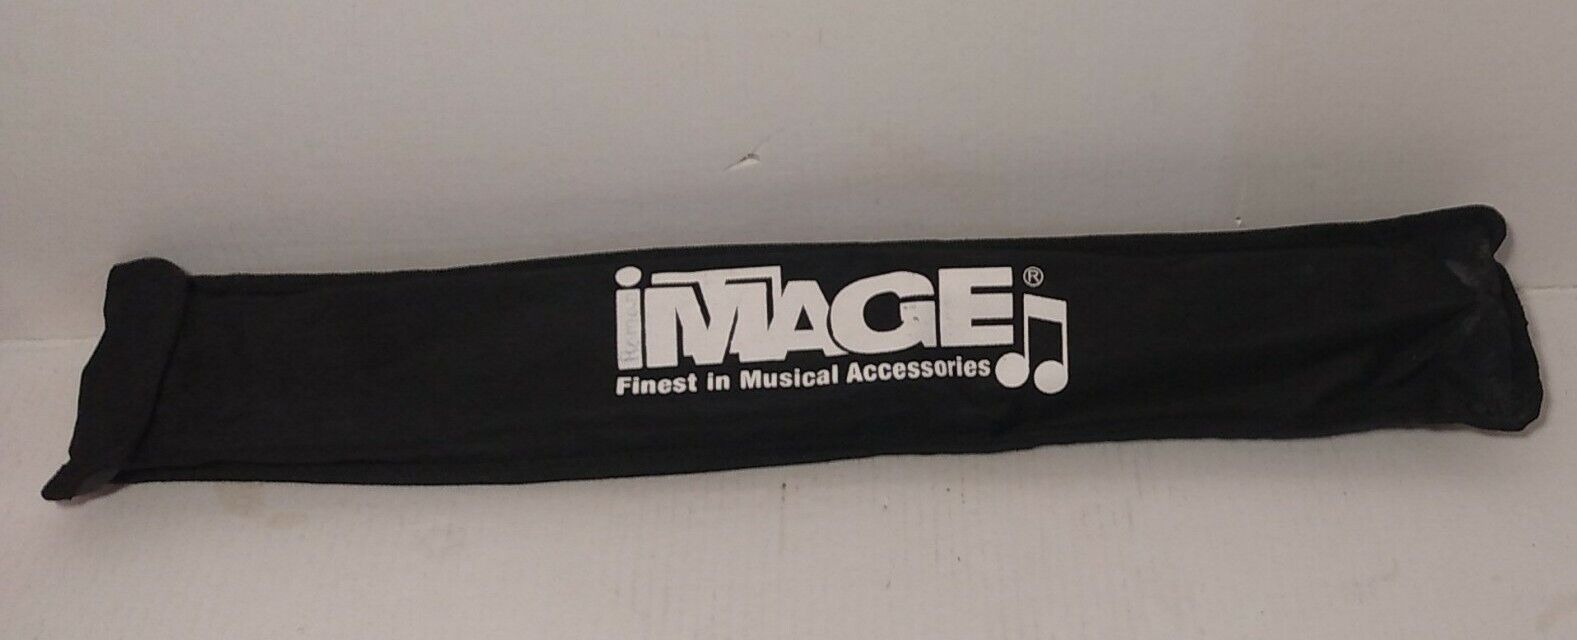 ImageFolding Clearance SALE! Limited time! Music Stand Great interest With Carry Bag